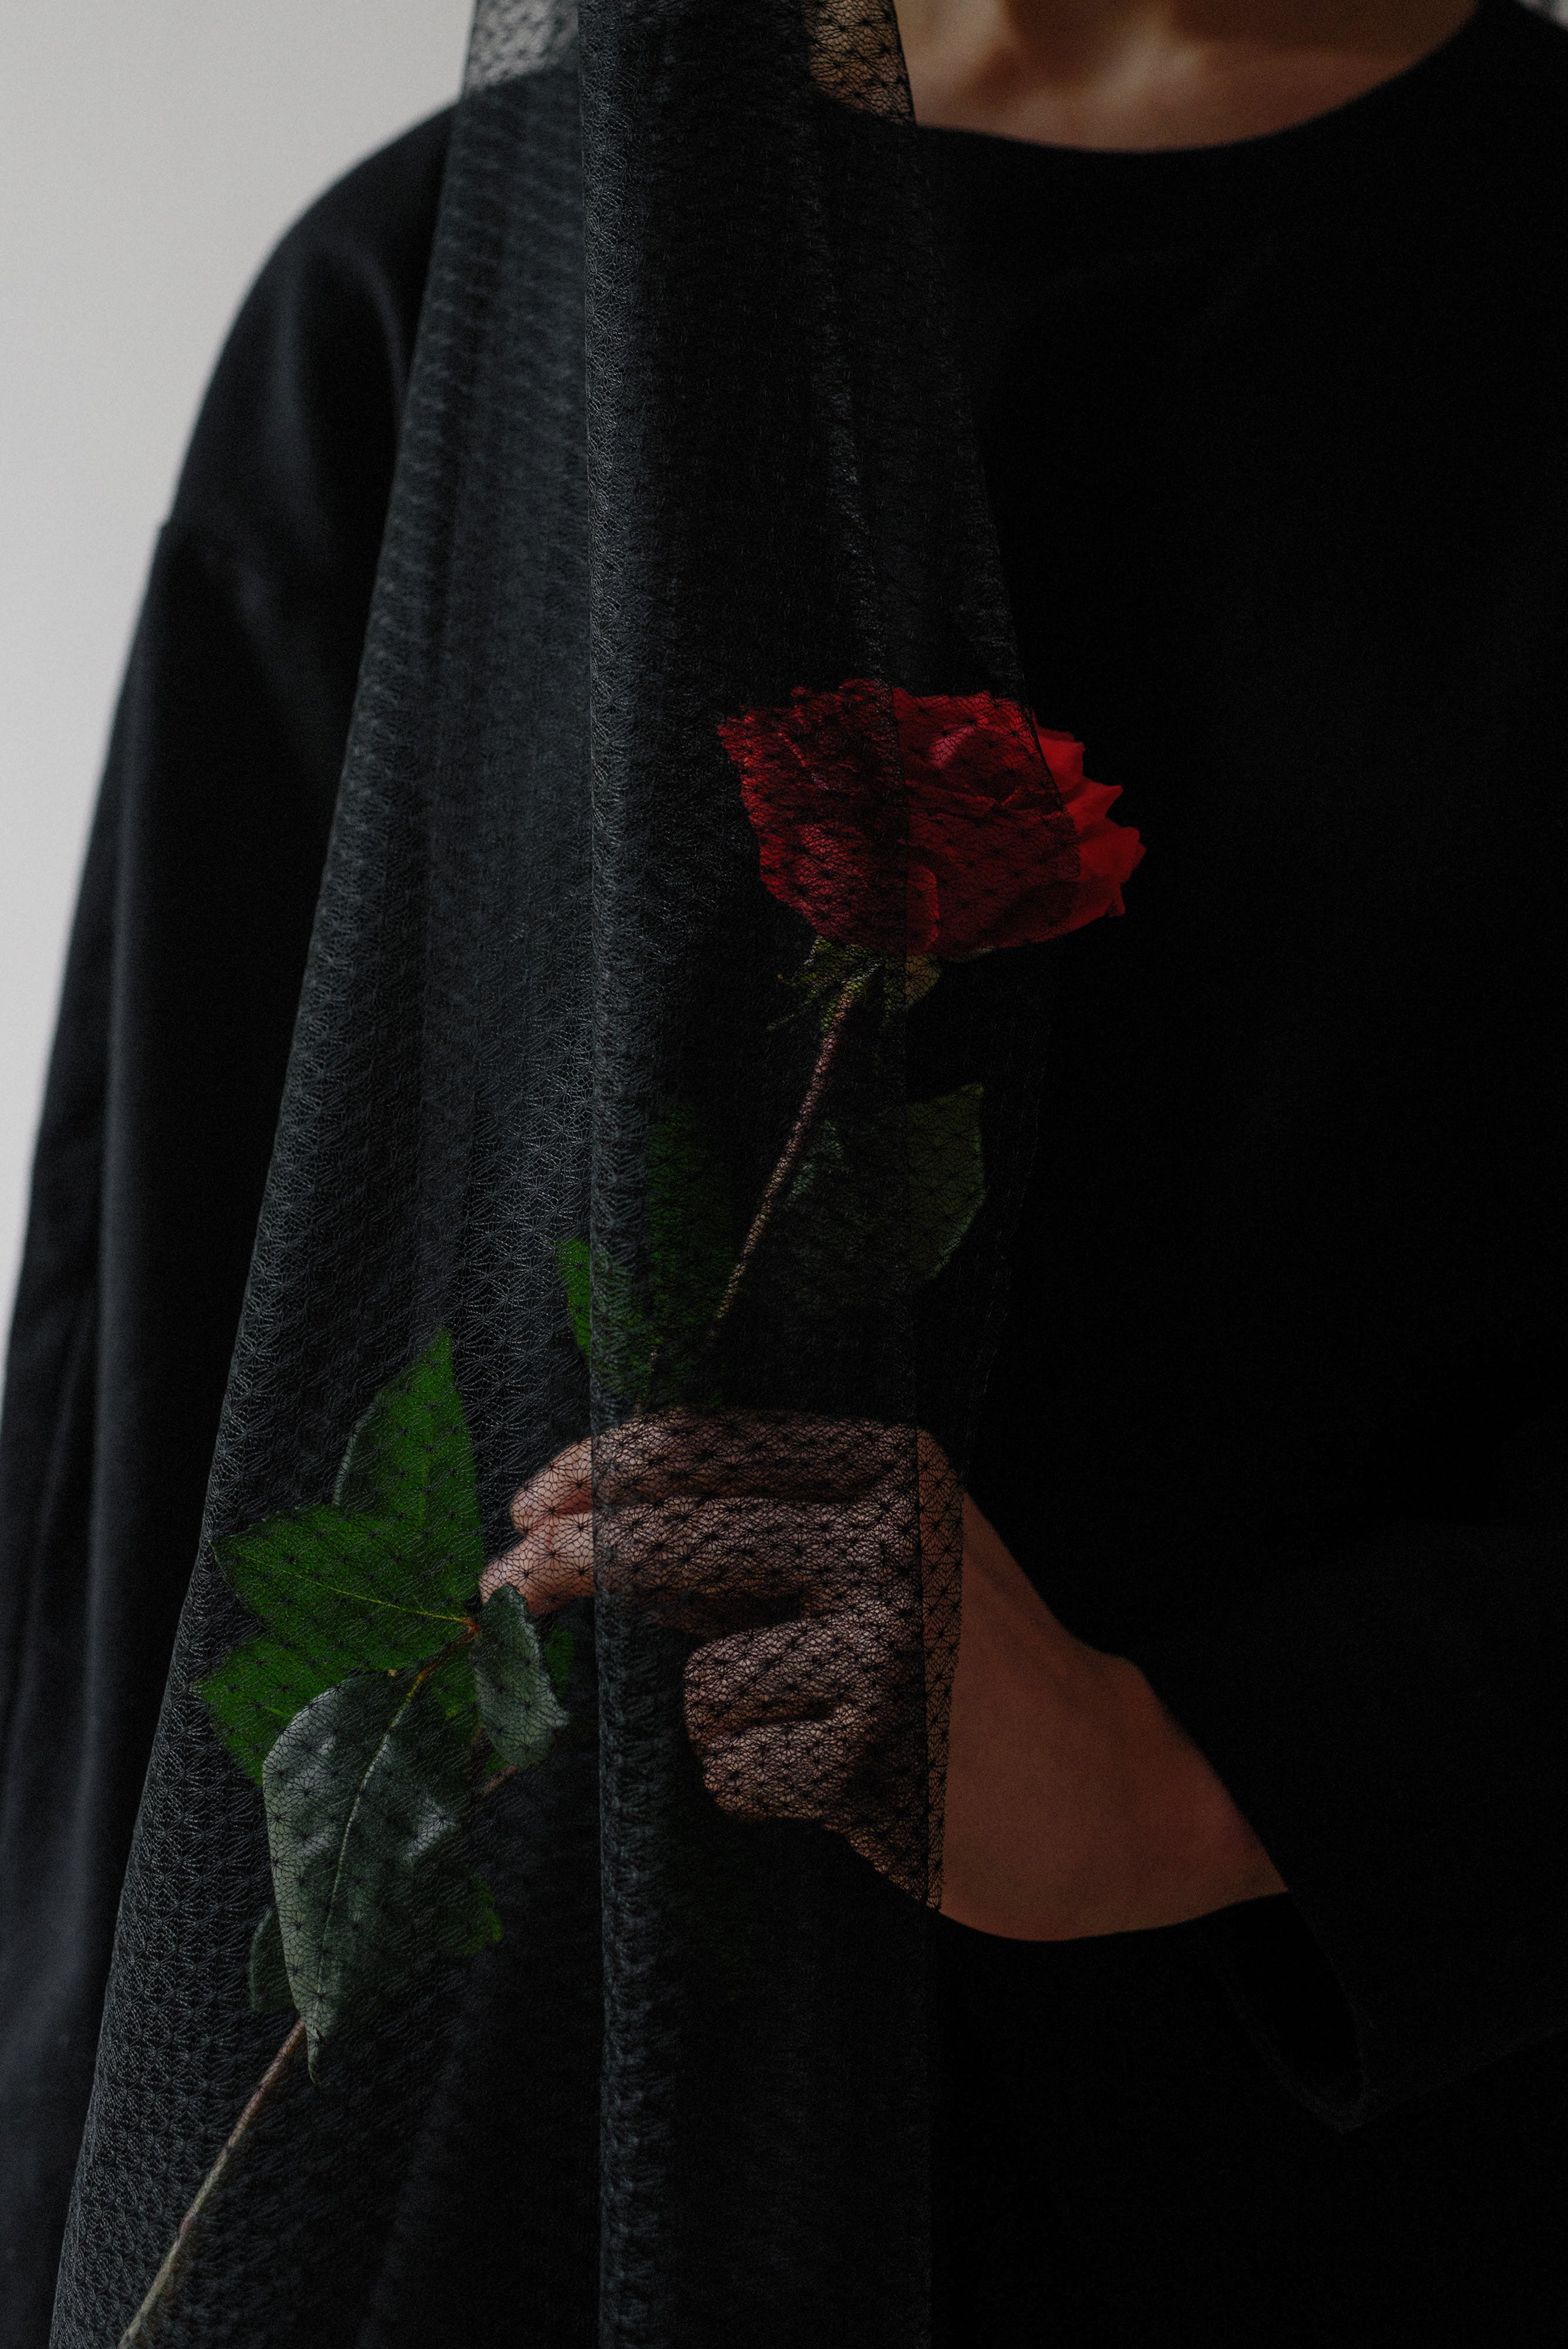 A woman covered in a black veil, holding a rose. | Source: Pexels